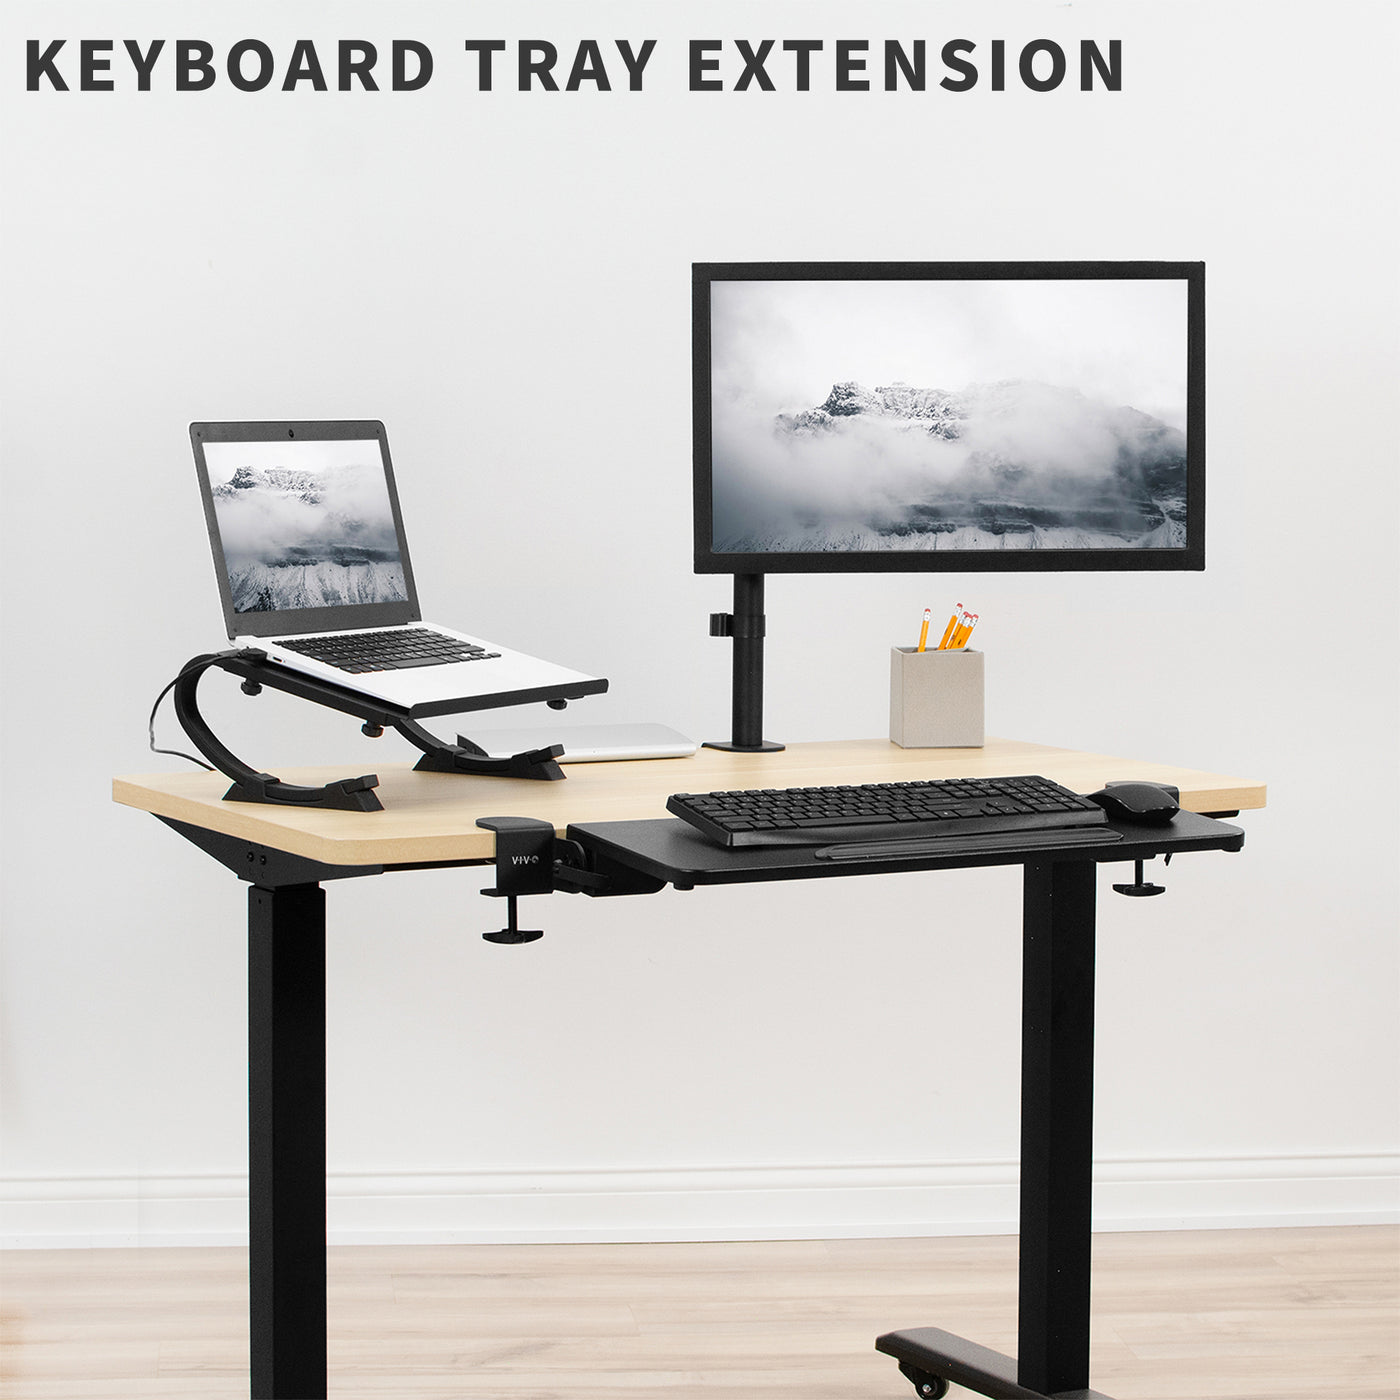 Keyboard tray extension to add space to a smaller desktop.